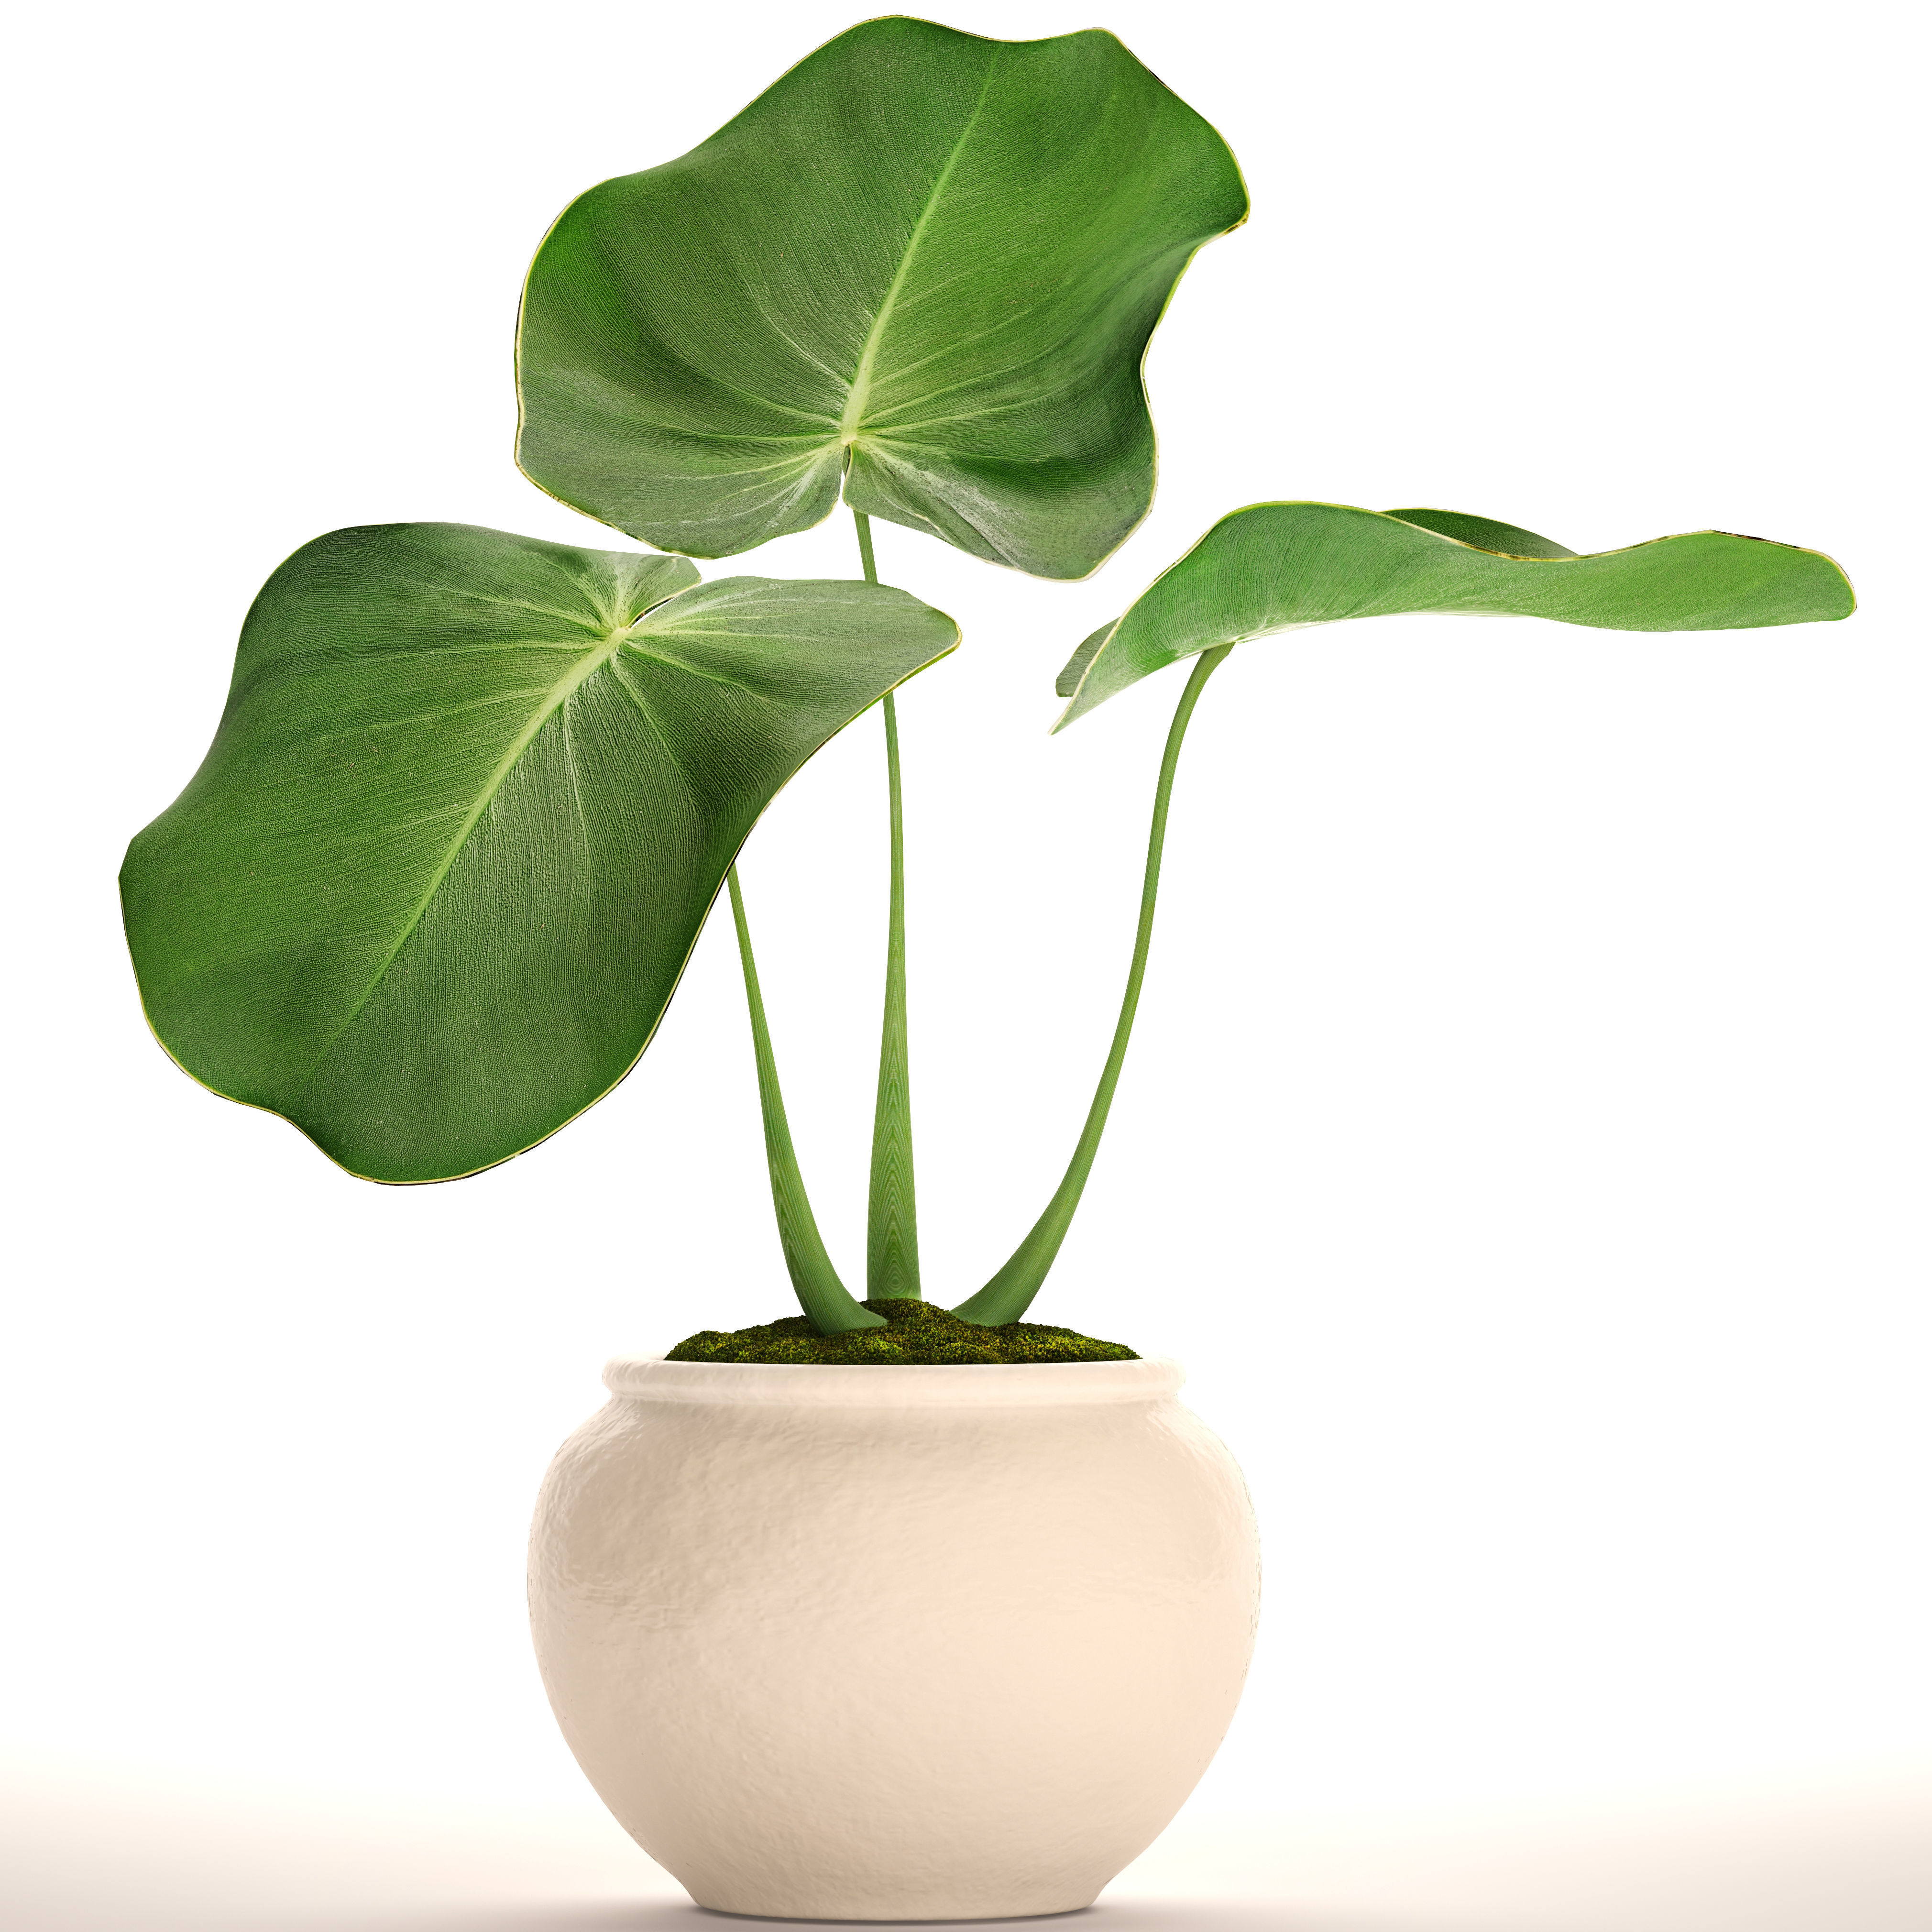 Tropical plant in pot 2 3D | CGTrader